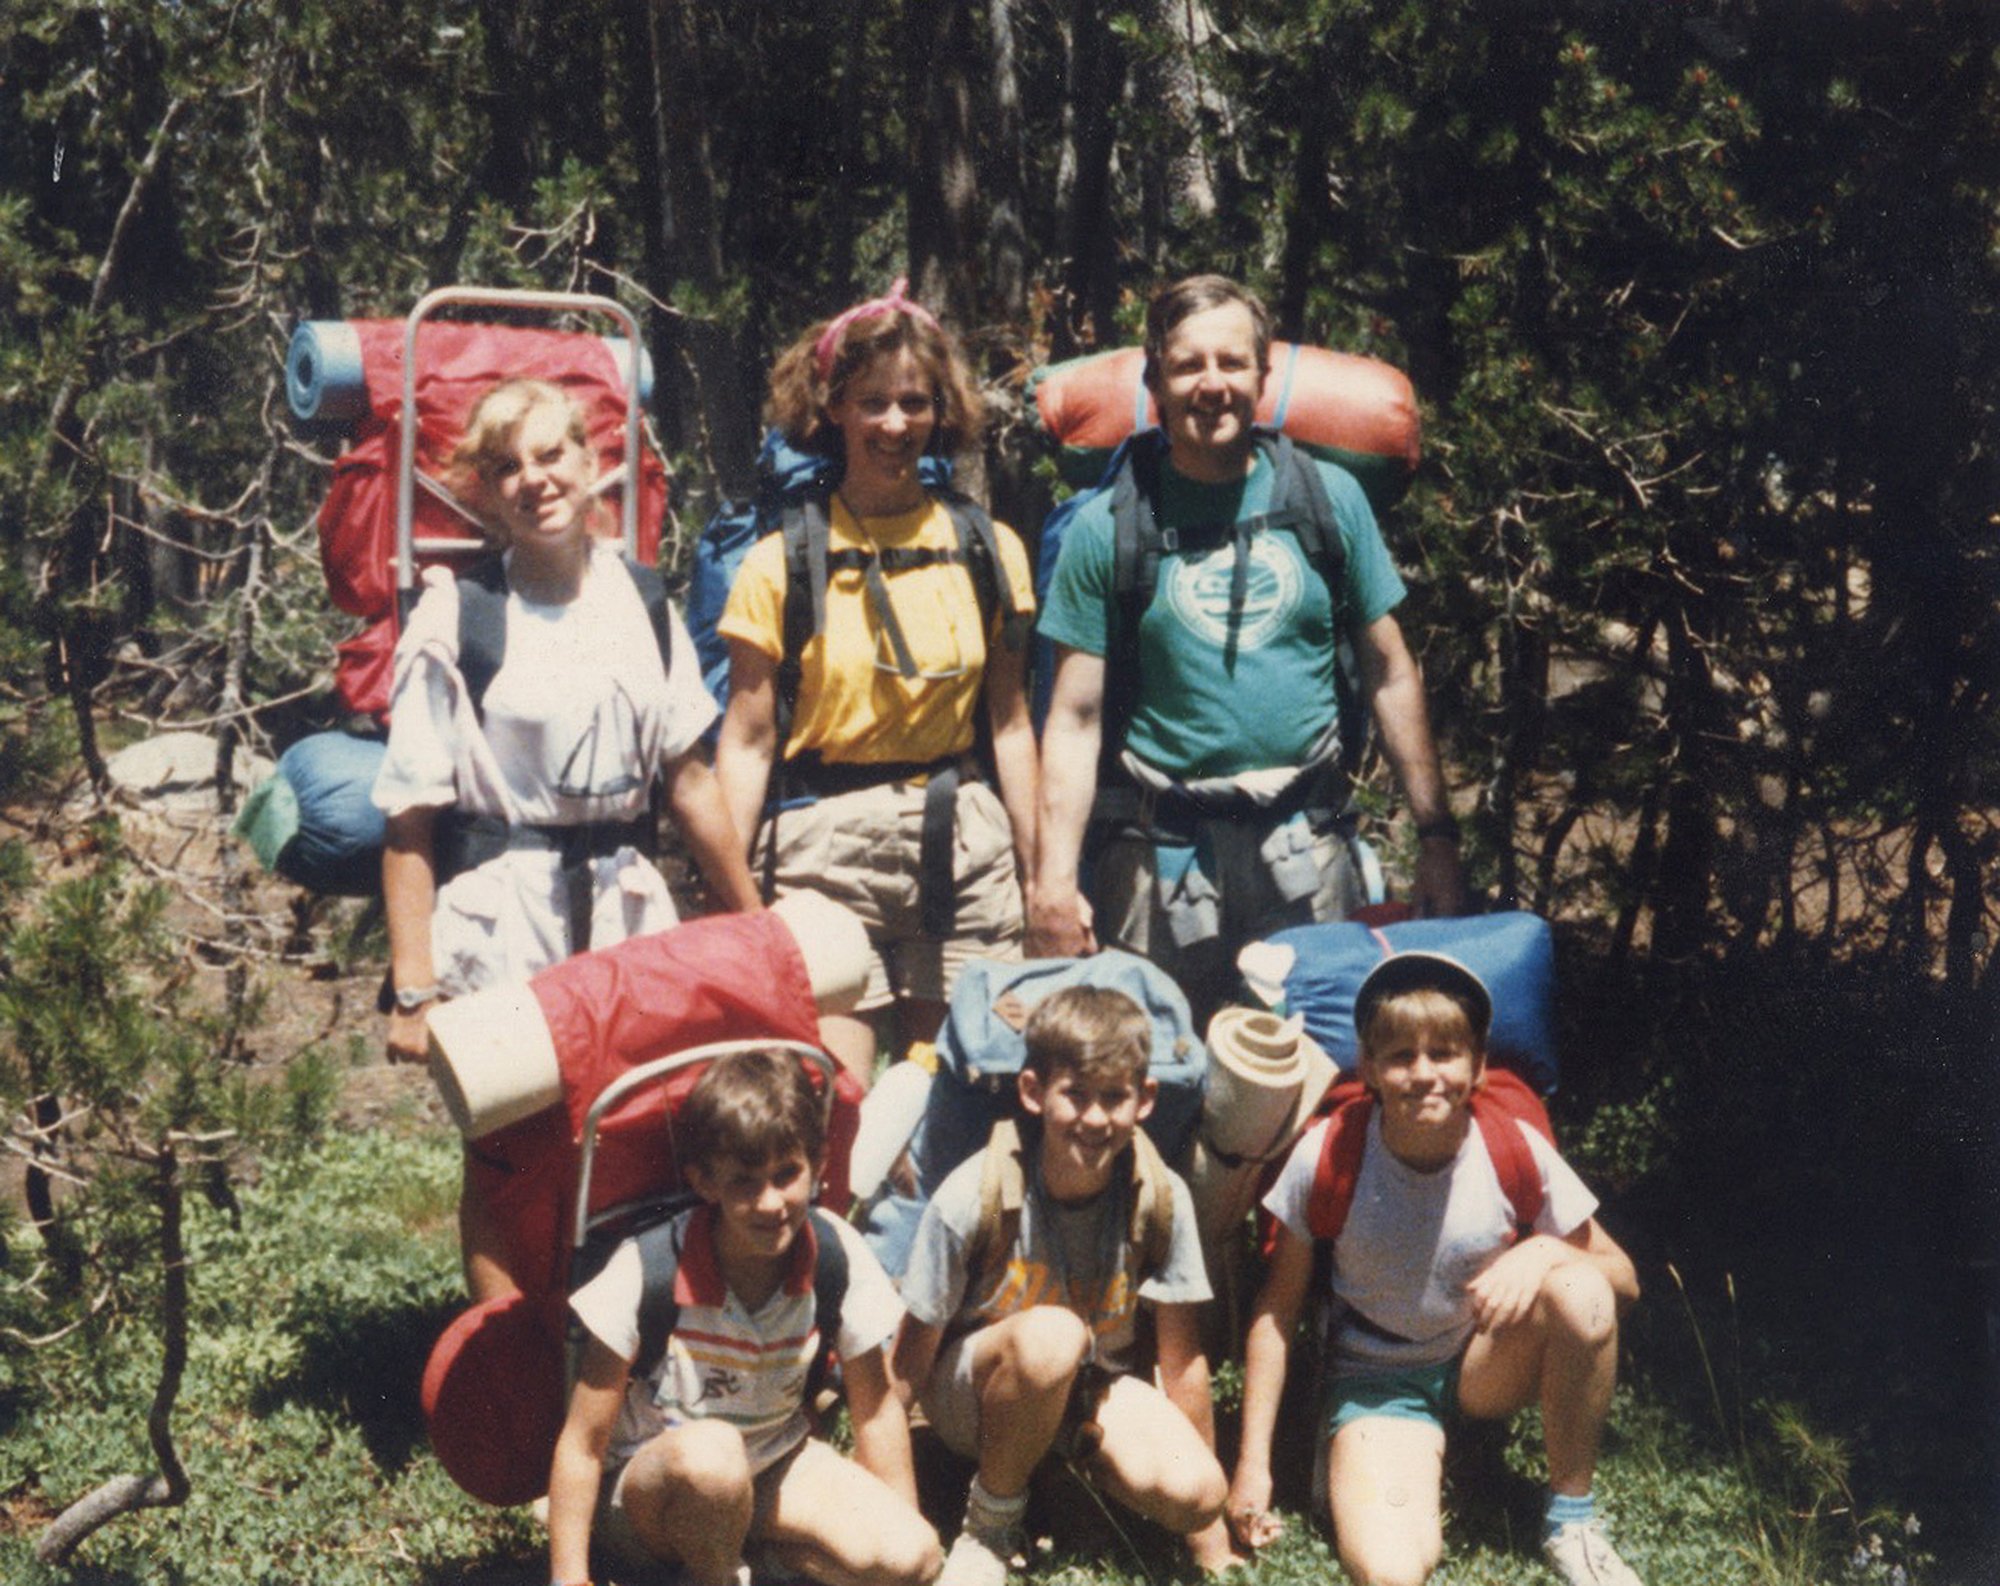 Chris Fitzsimmons backpacking with her family